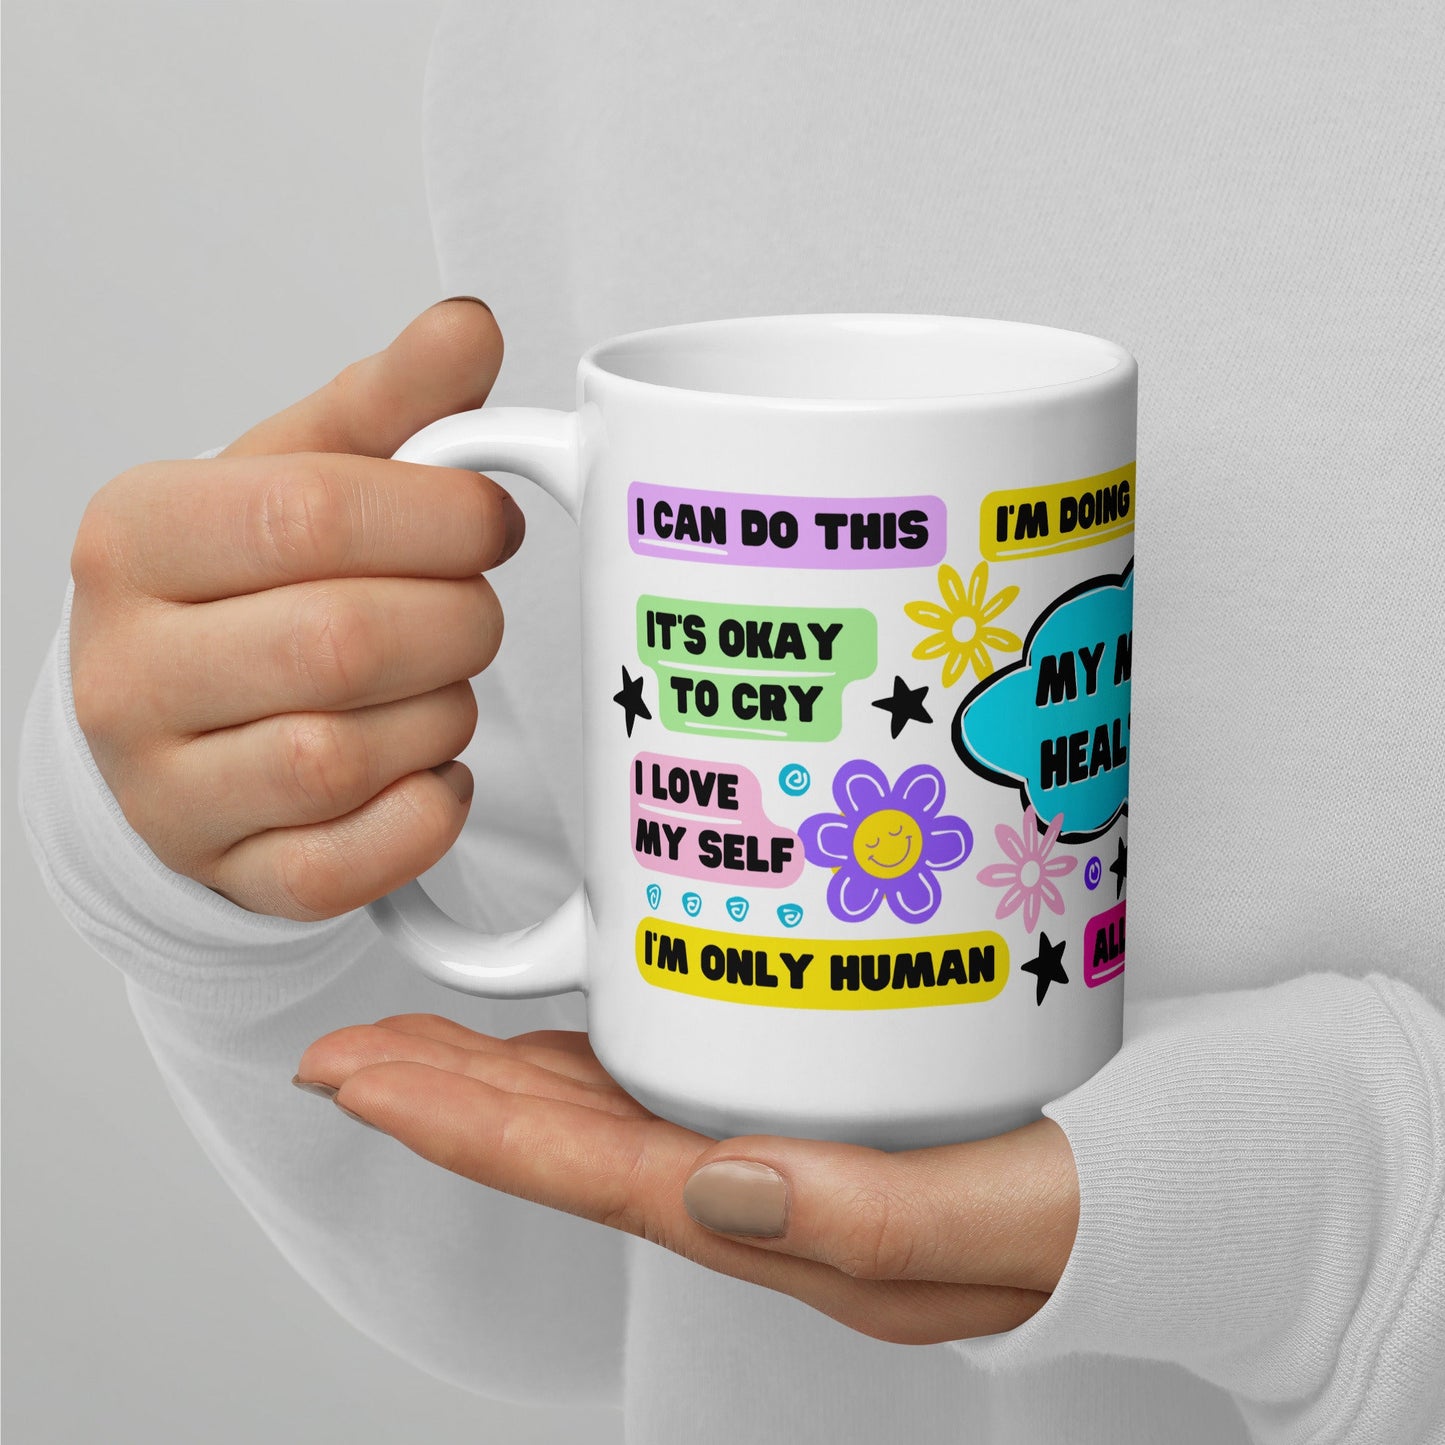 My Mental Health Cup White glossy mug | Affirmations, Mental Breakdown, Coffee Cup, Encouraging Quotes, Self Care, Anxiety, Self Love Art